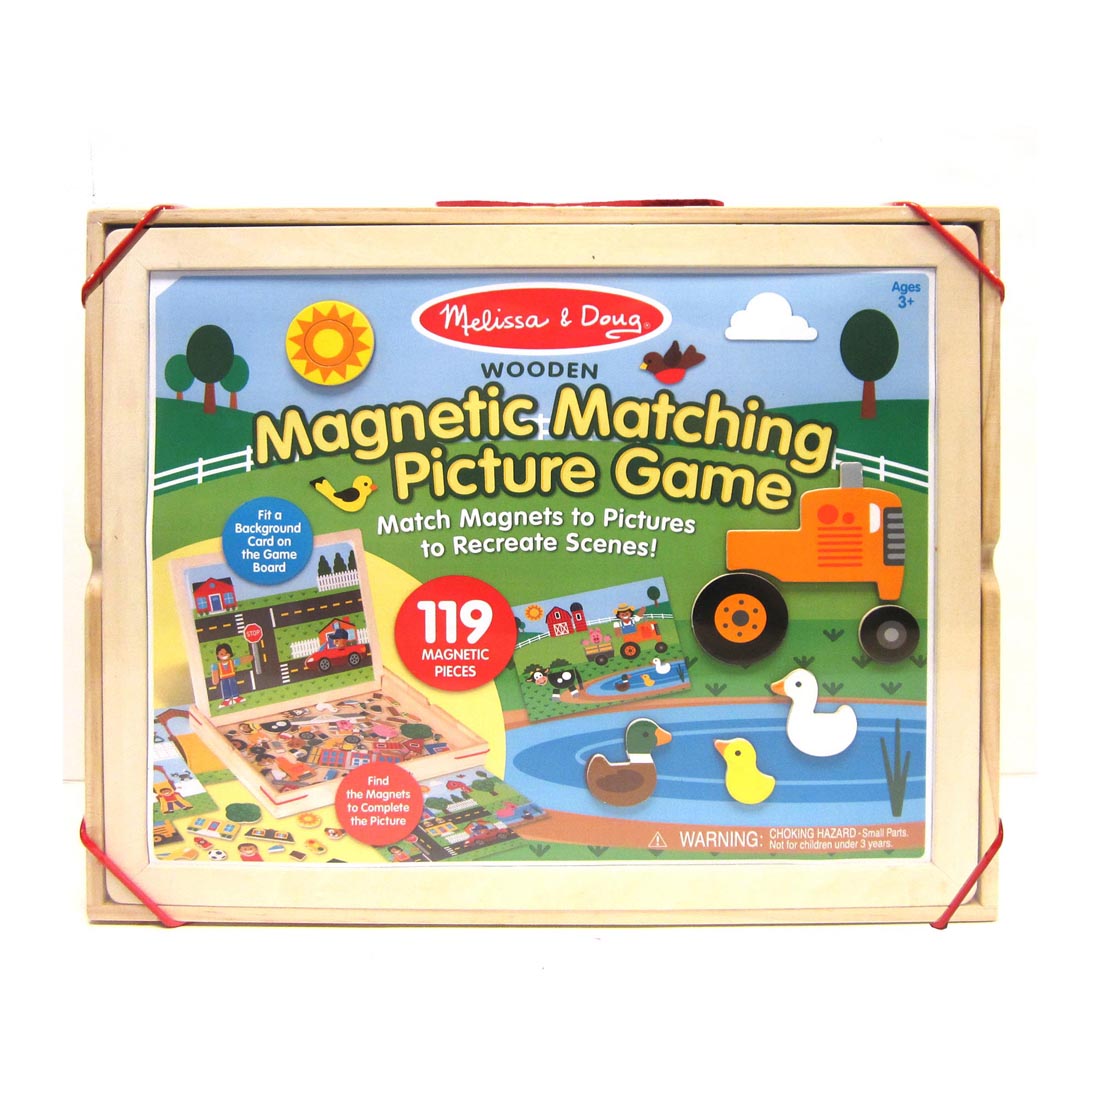 Wooden Magnetic Matching Picture Game By Melissa & Doug